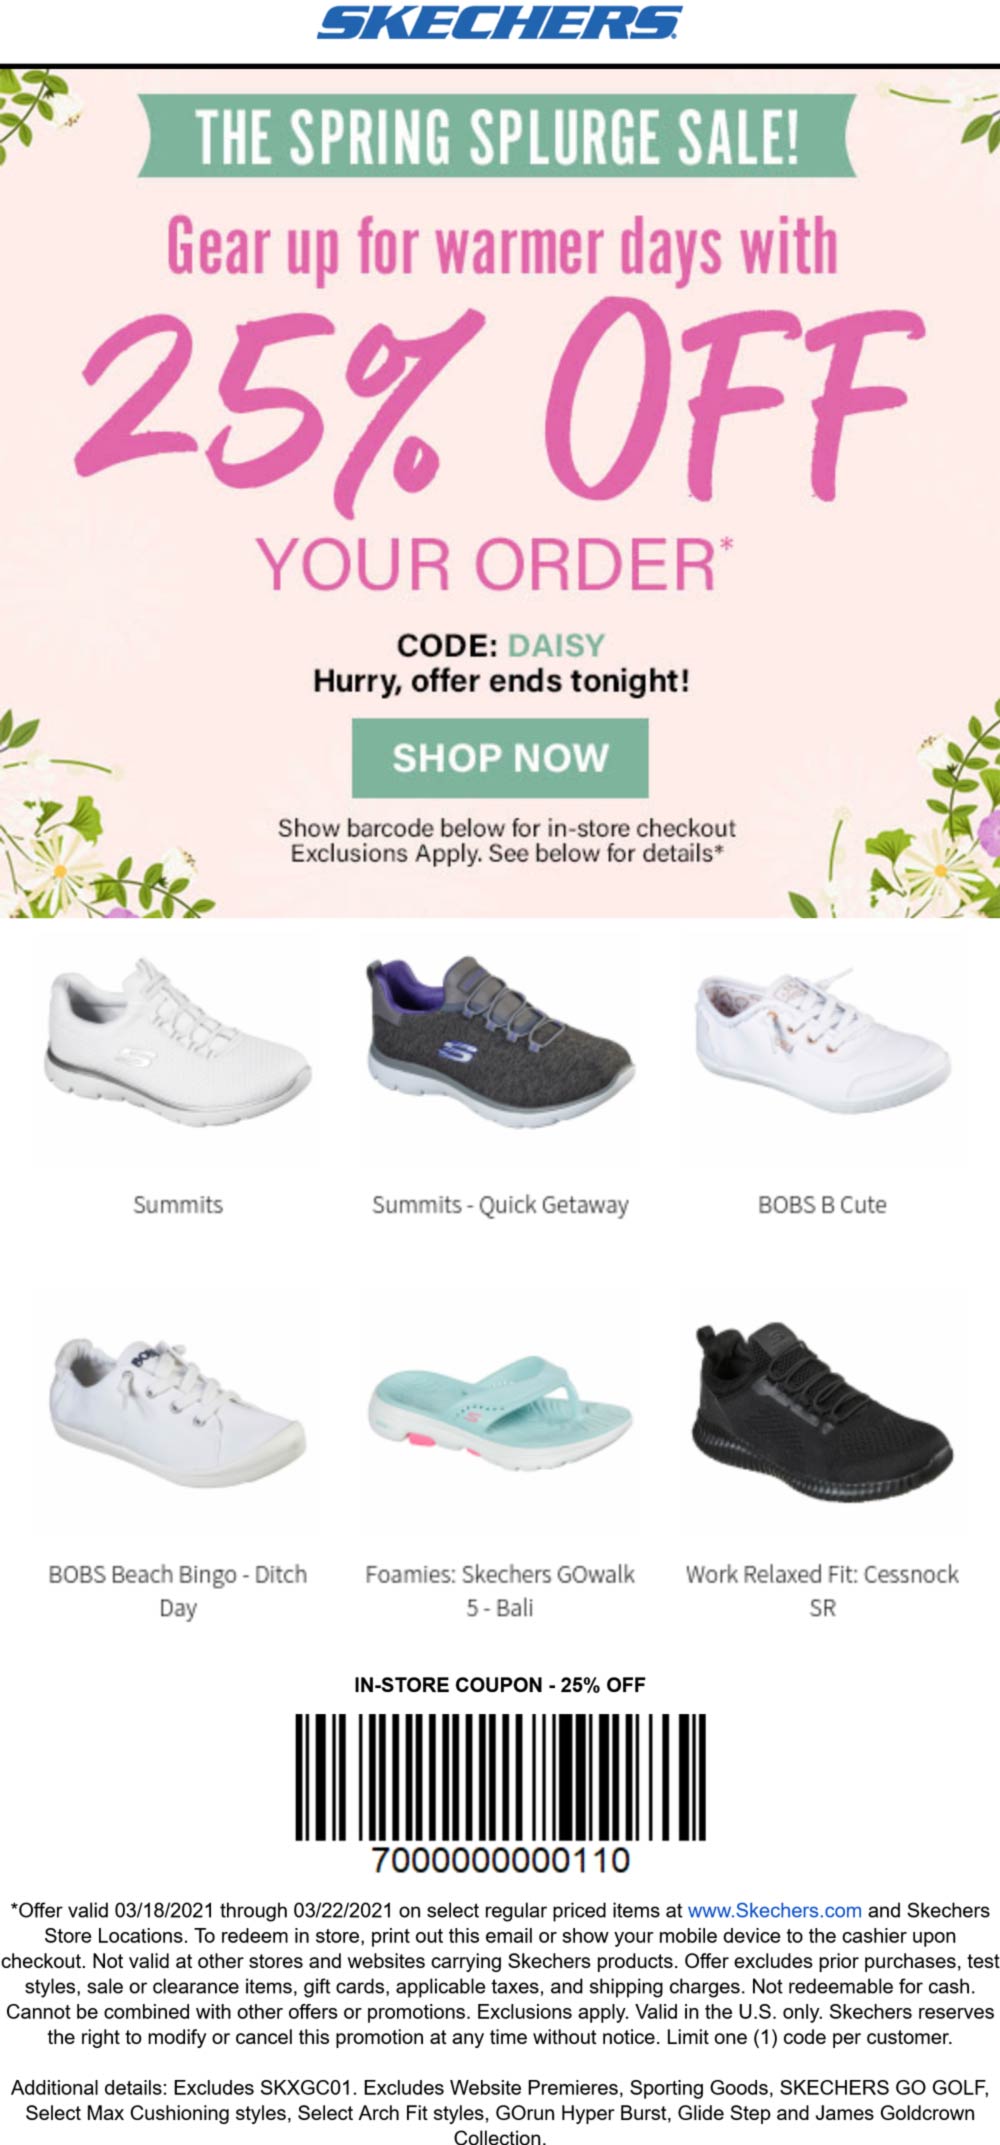 Skechers stores Coupon  25% off today at Skechers, or online via promo code DAISY #skechers 